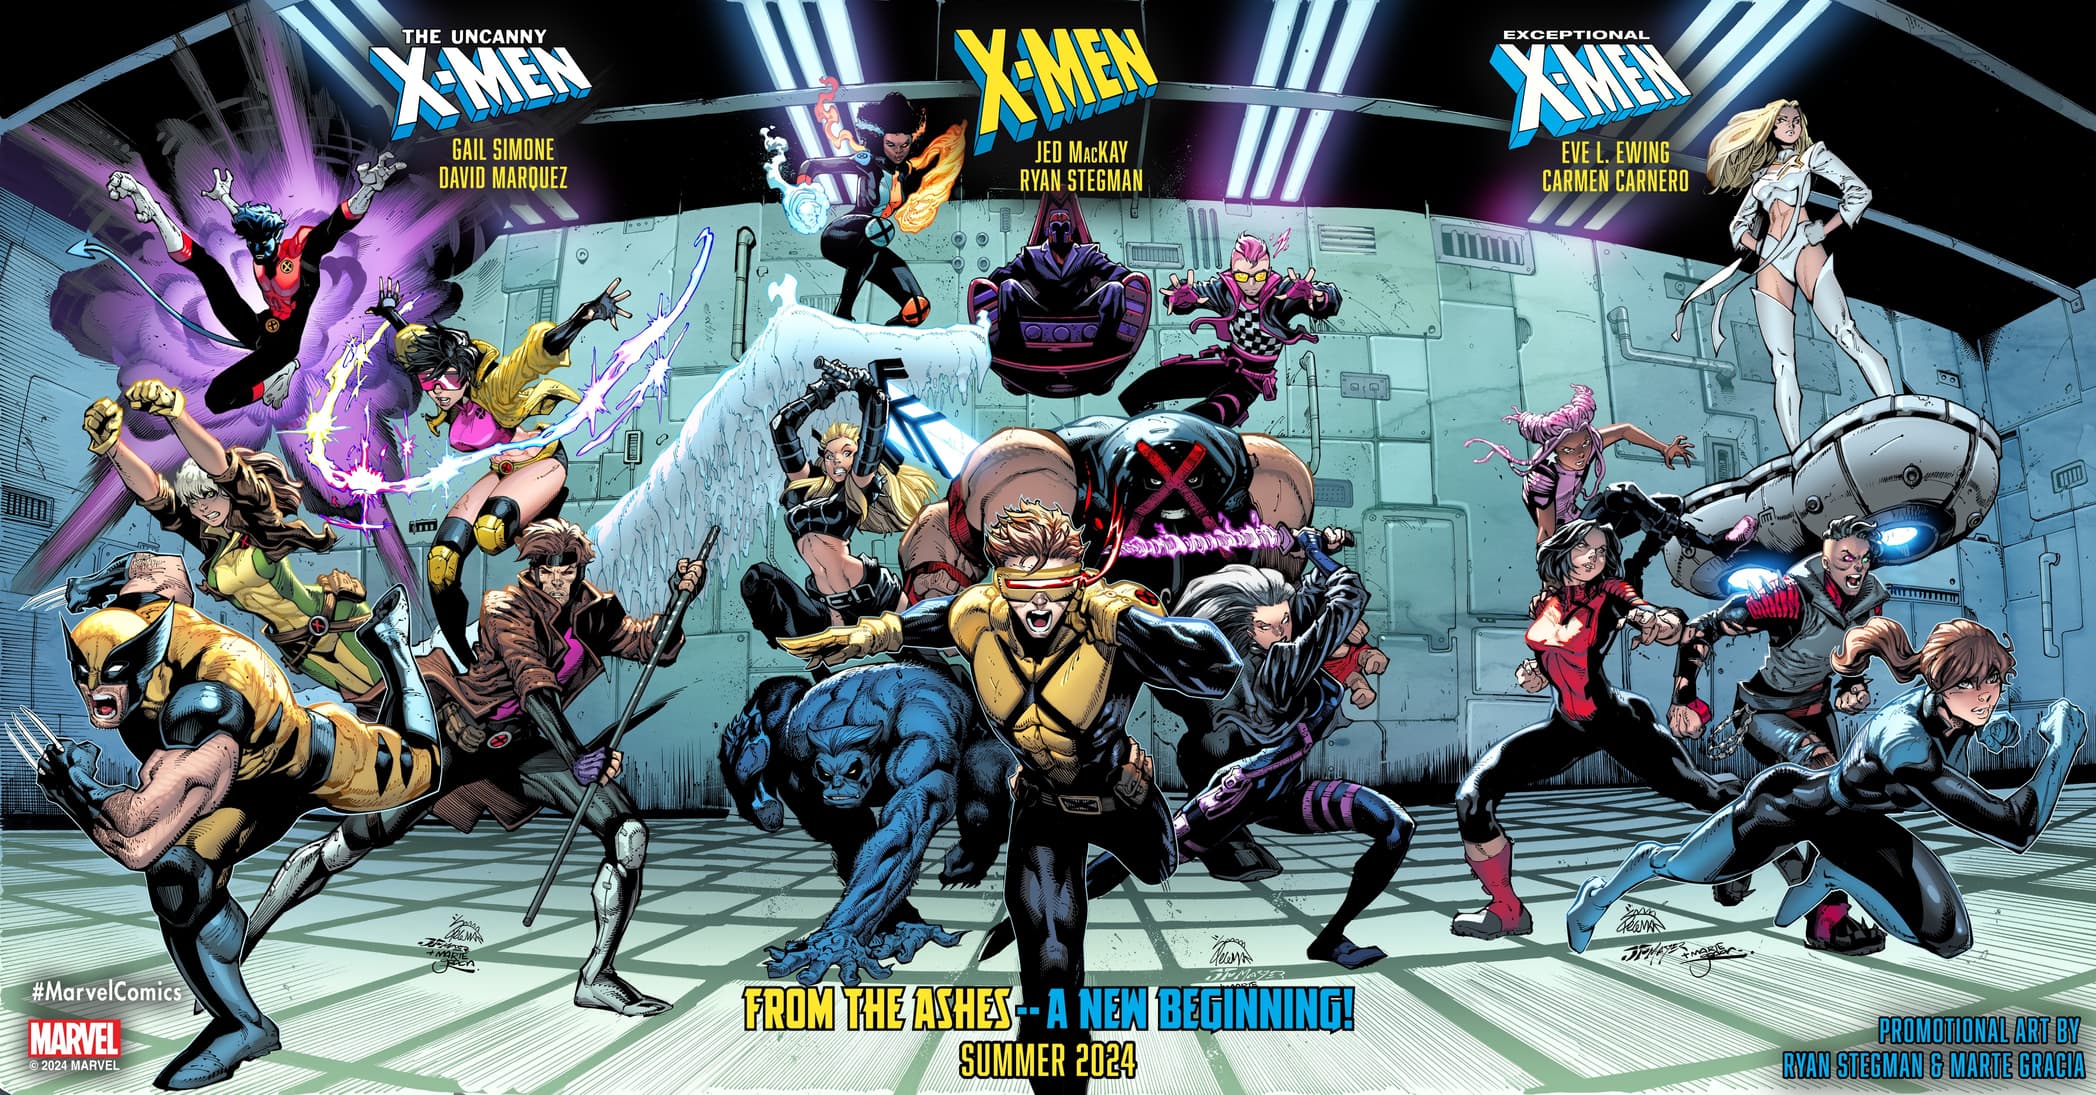 'X-Men: From the Ashes' promotional image by Ryan Stegman and Marte Gracia